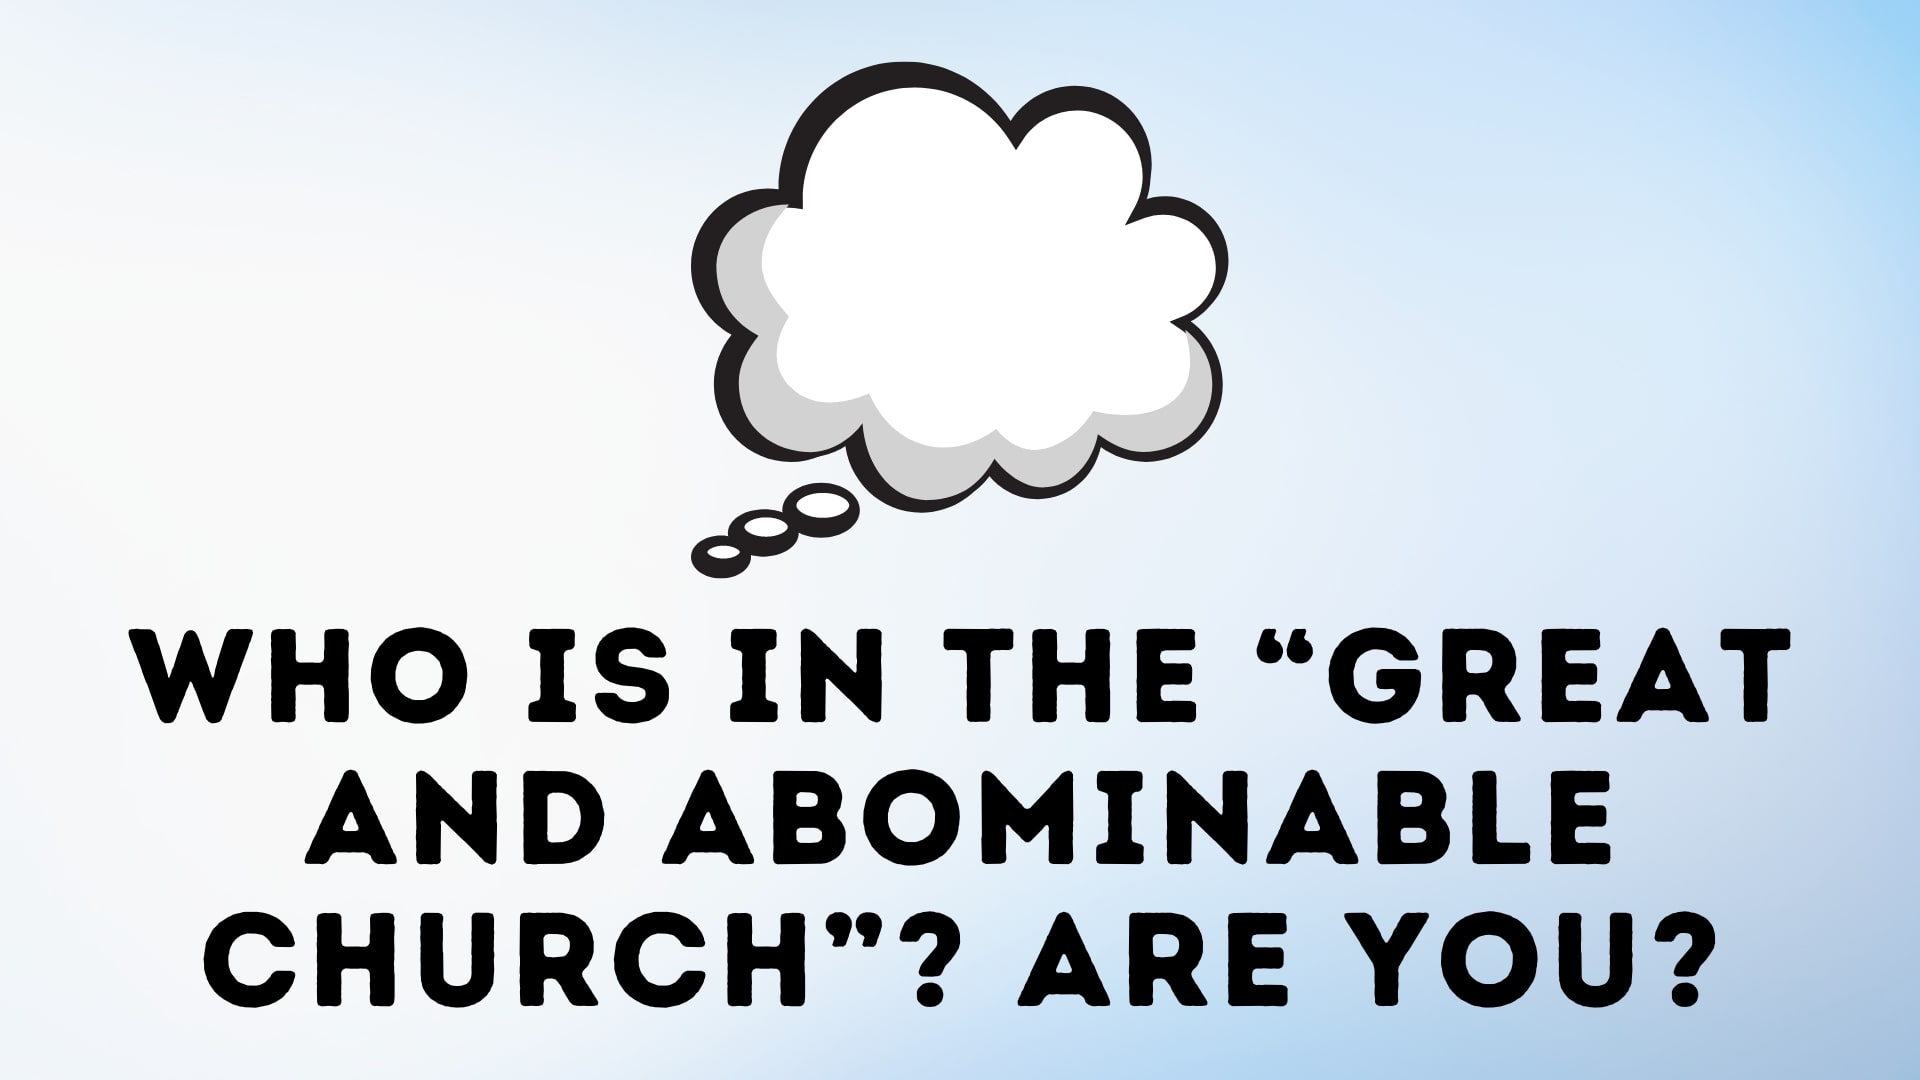 Who is in the “great and abominable church”? Are you?